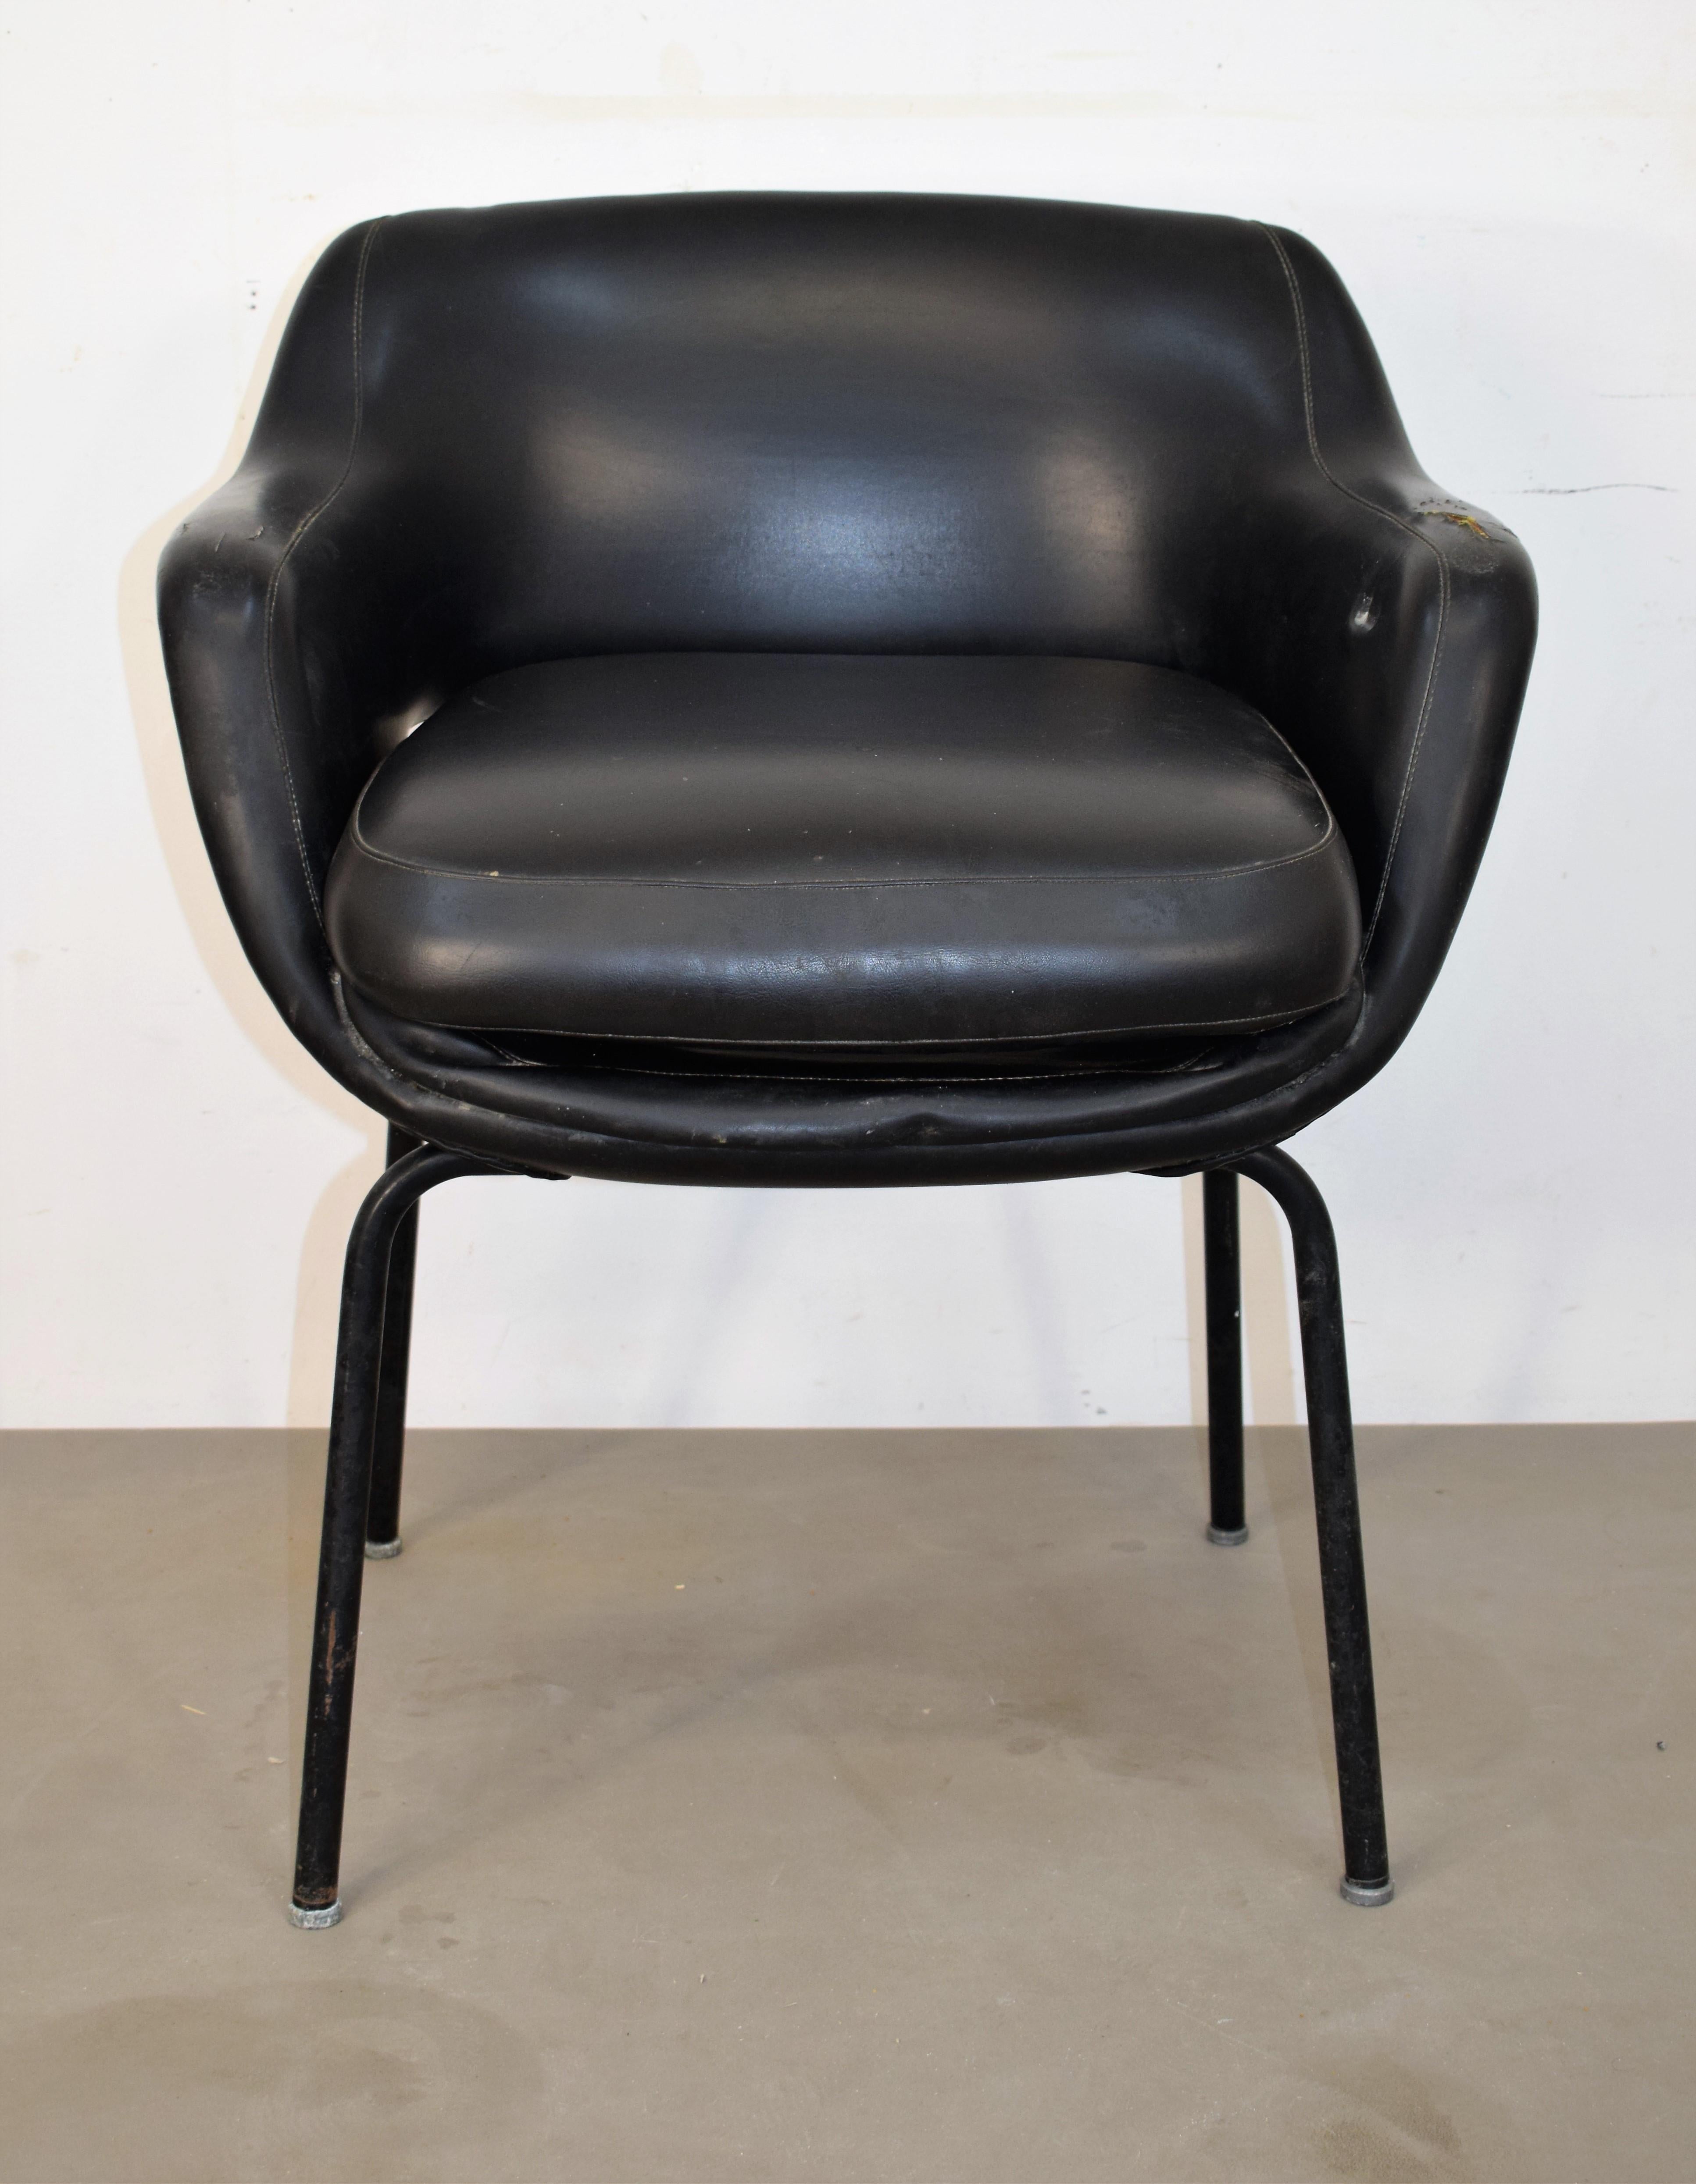 Olli Mannermaa for Cassina chair, 1970s. 
Dimensions: H= 77 cm; W= 63 cm; D=55 cm; Height seat = 50 cm.